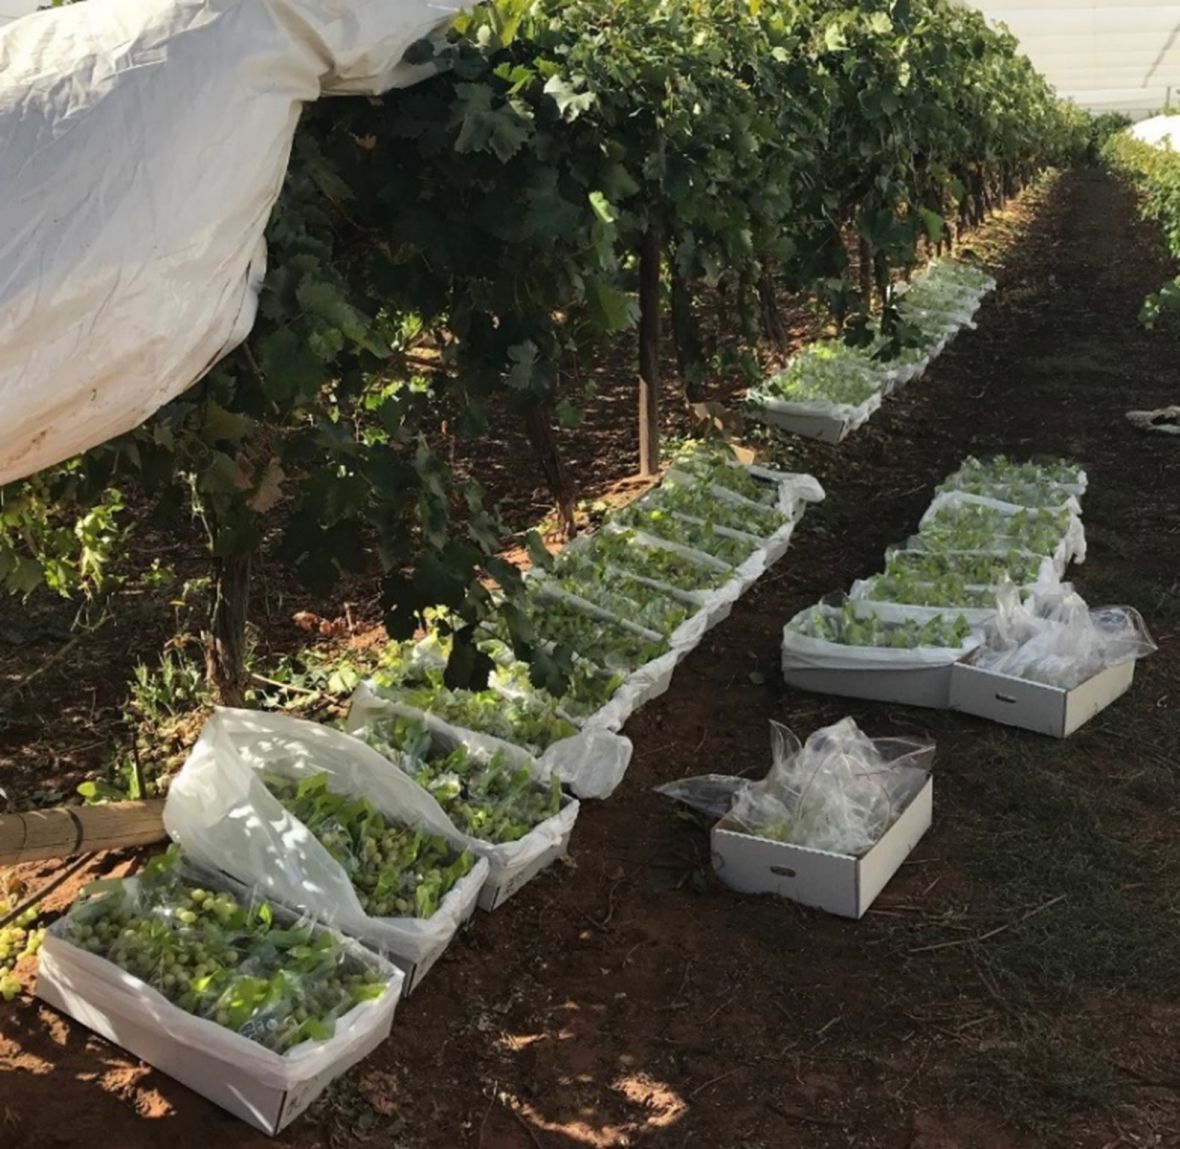 ‘Luisco’ grapes packed into cartons during rot risk prediction and delayed cooling experiment in Mildura during March 2021.